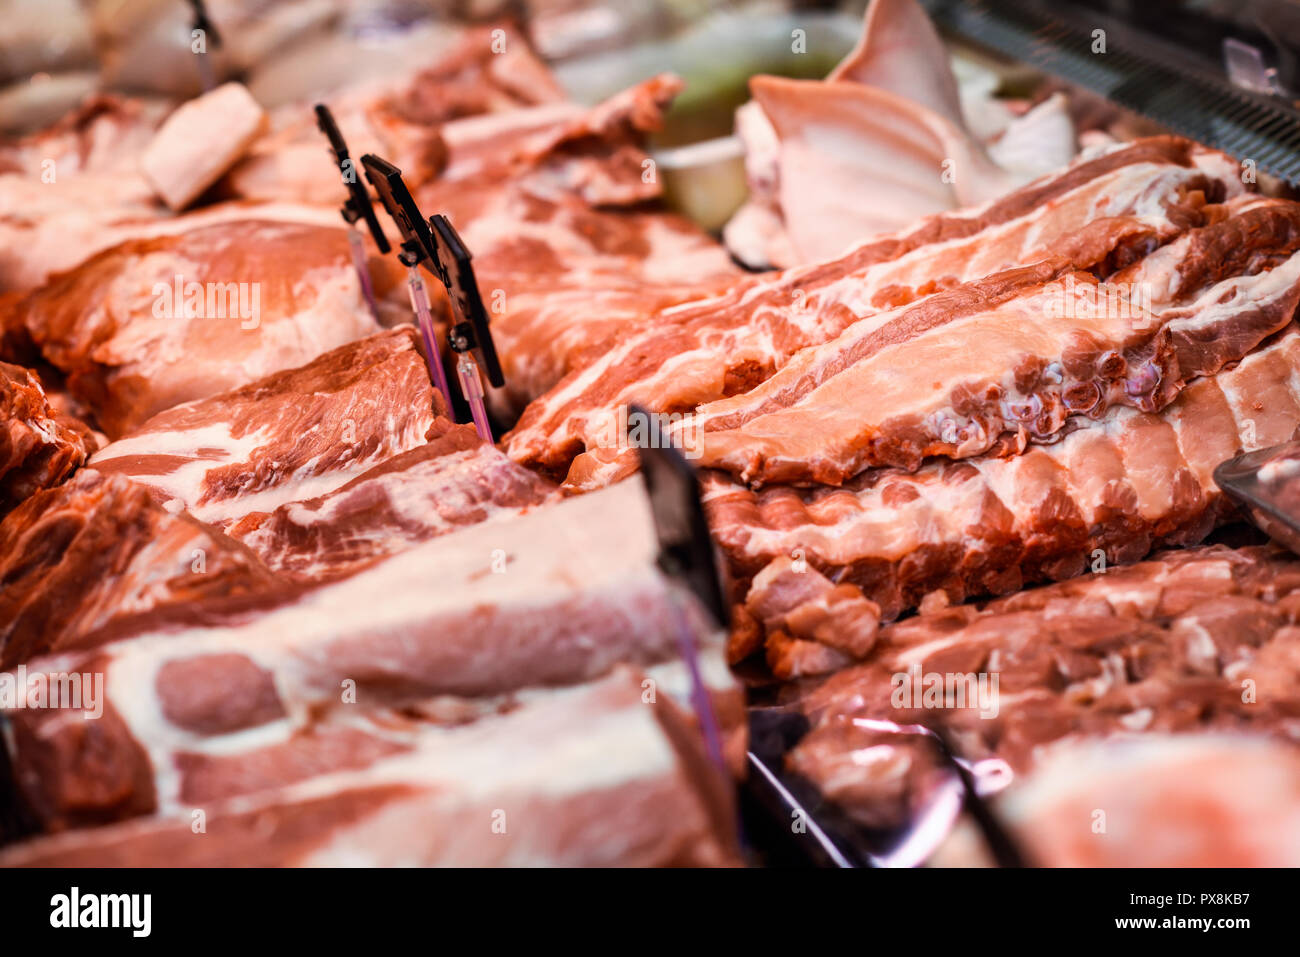 https://c8.alamy.com/comp/PX8KB7/fresh-raw-red-meat-at-the-butcher-in-refrigerated-display-PX8KB7.jpg